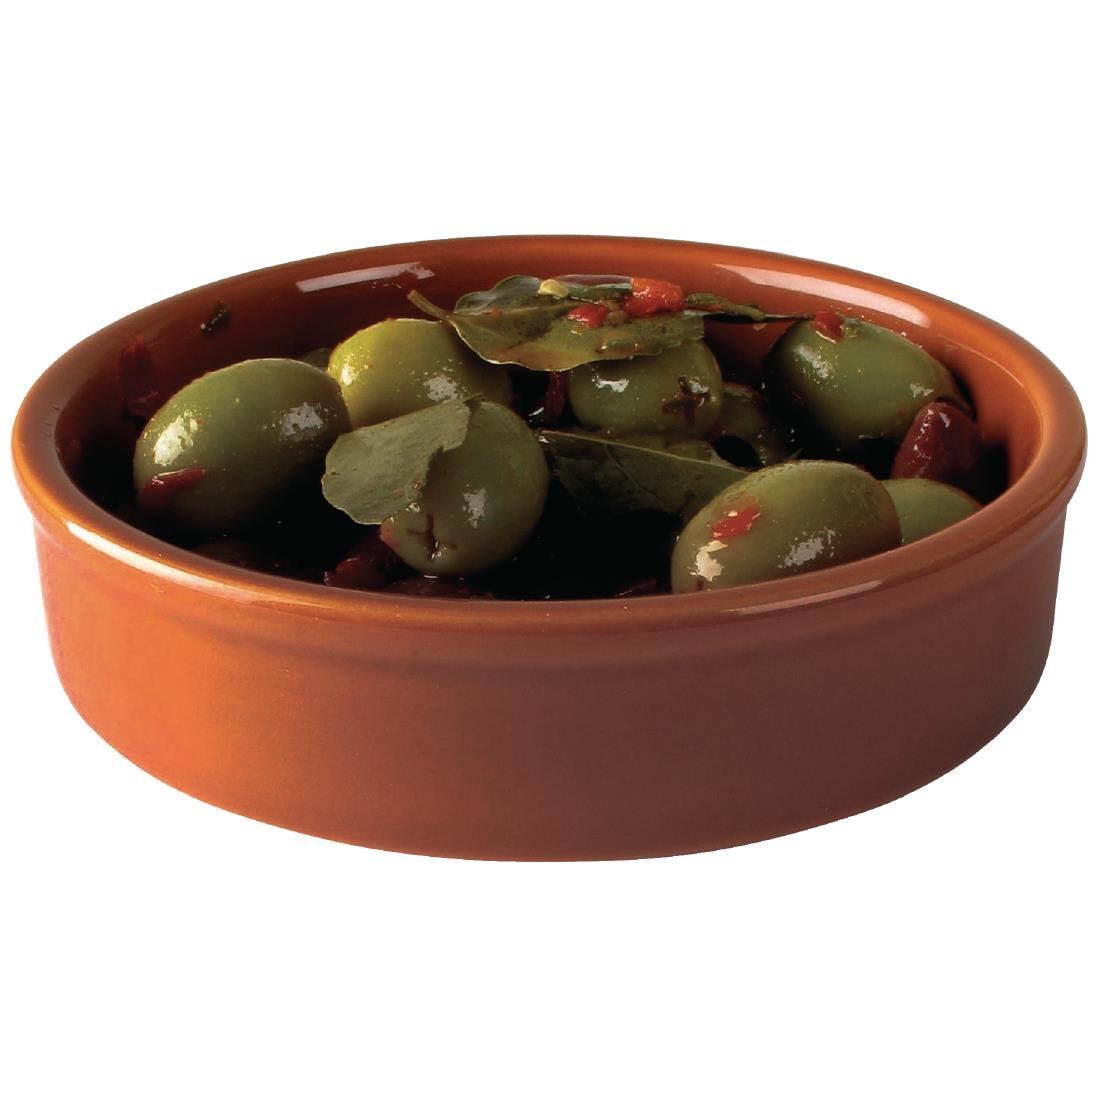 Olympia Rustic Mediterranean Large Dishes 134mm (Pack of 6) - CD741  - 1